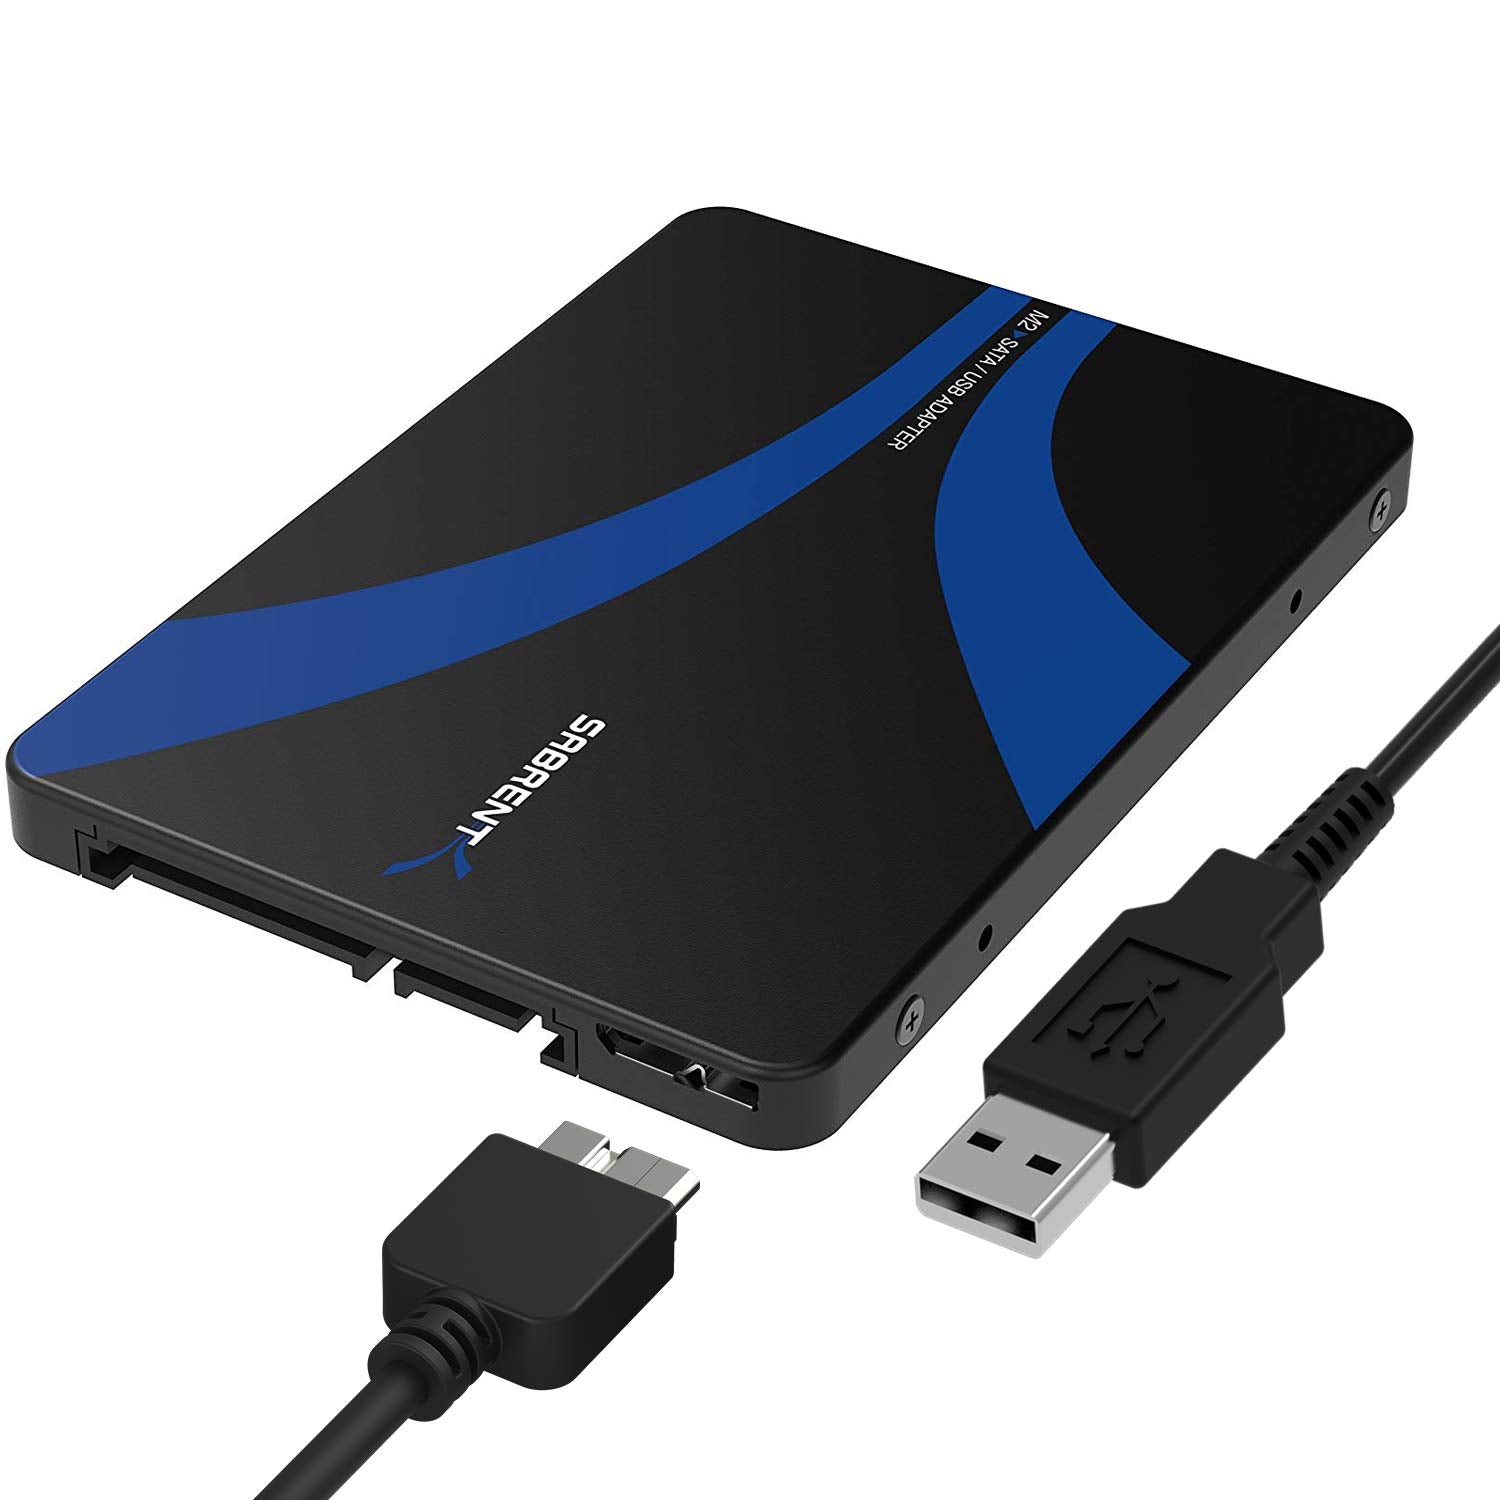 rulle Instruere Daggry M.2 SSD [NGFF] to USB 3.0 / SATA III 2.5-Inch Enclosure Adapter - Sabrent